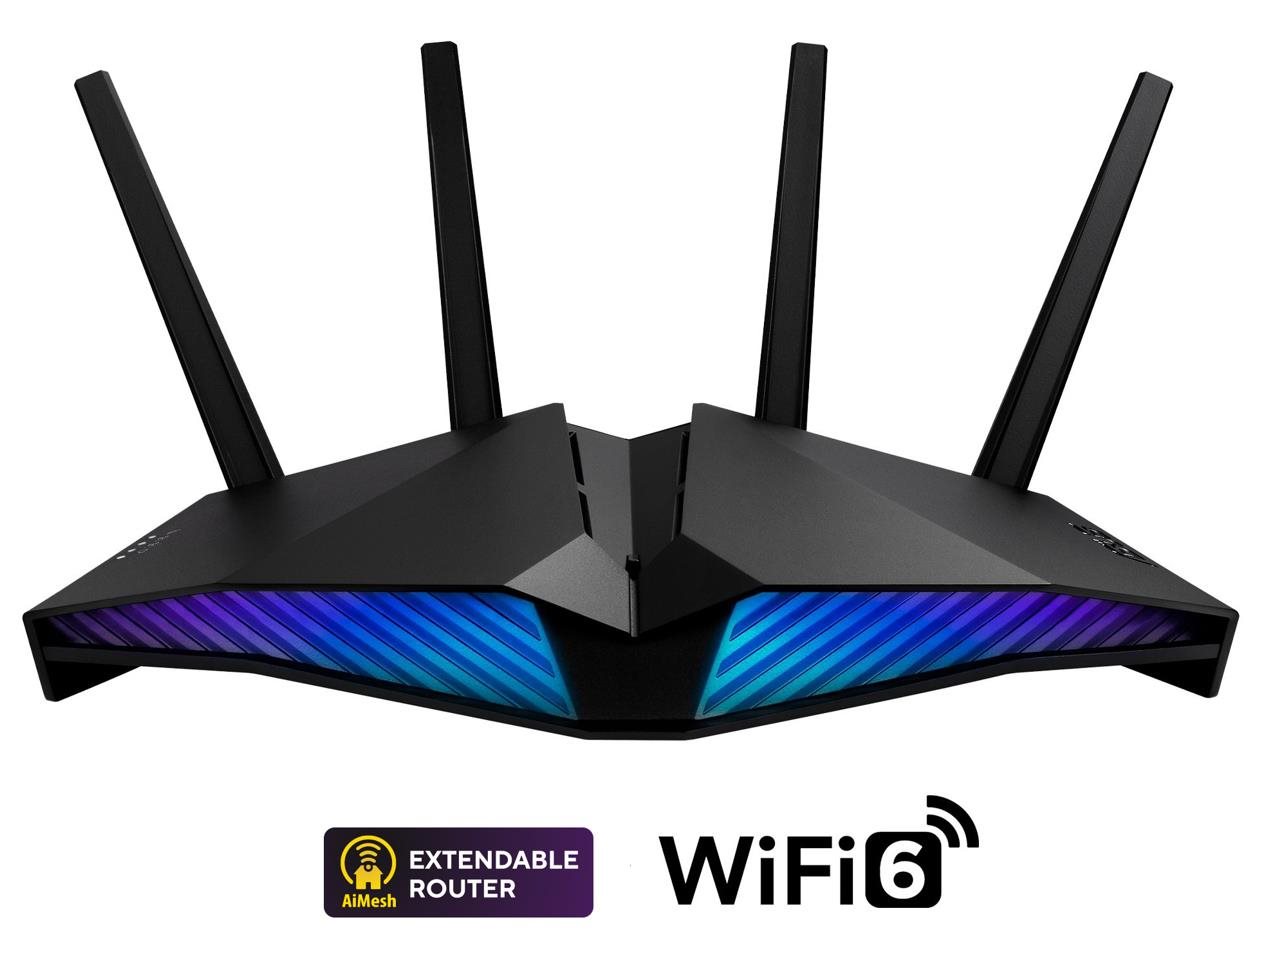 ASUS RT-AX82U V2 (AX5400) WiFi 6 Extendable Router,  AiMesh,  4G/ 5G Mobile Tethering1 